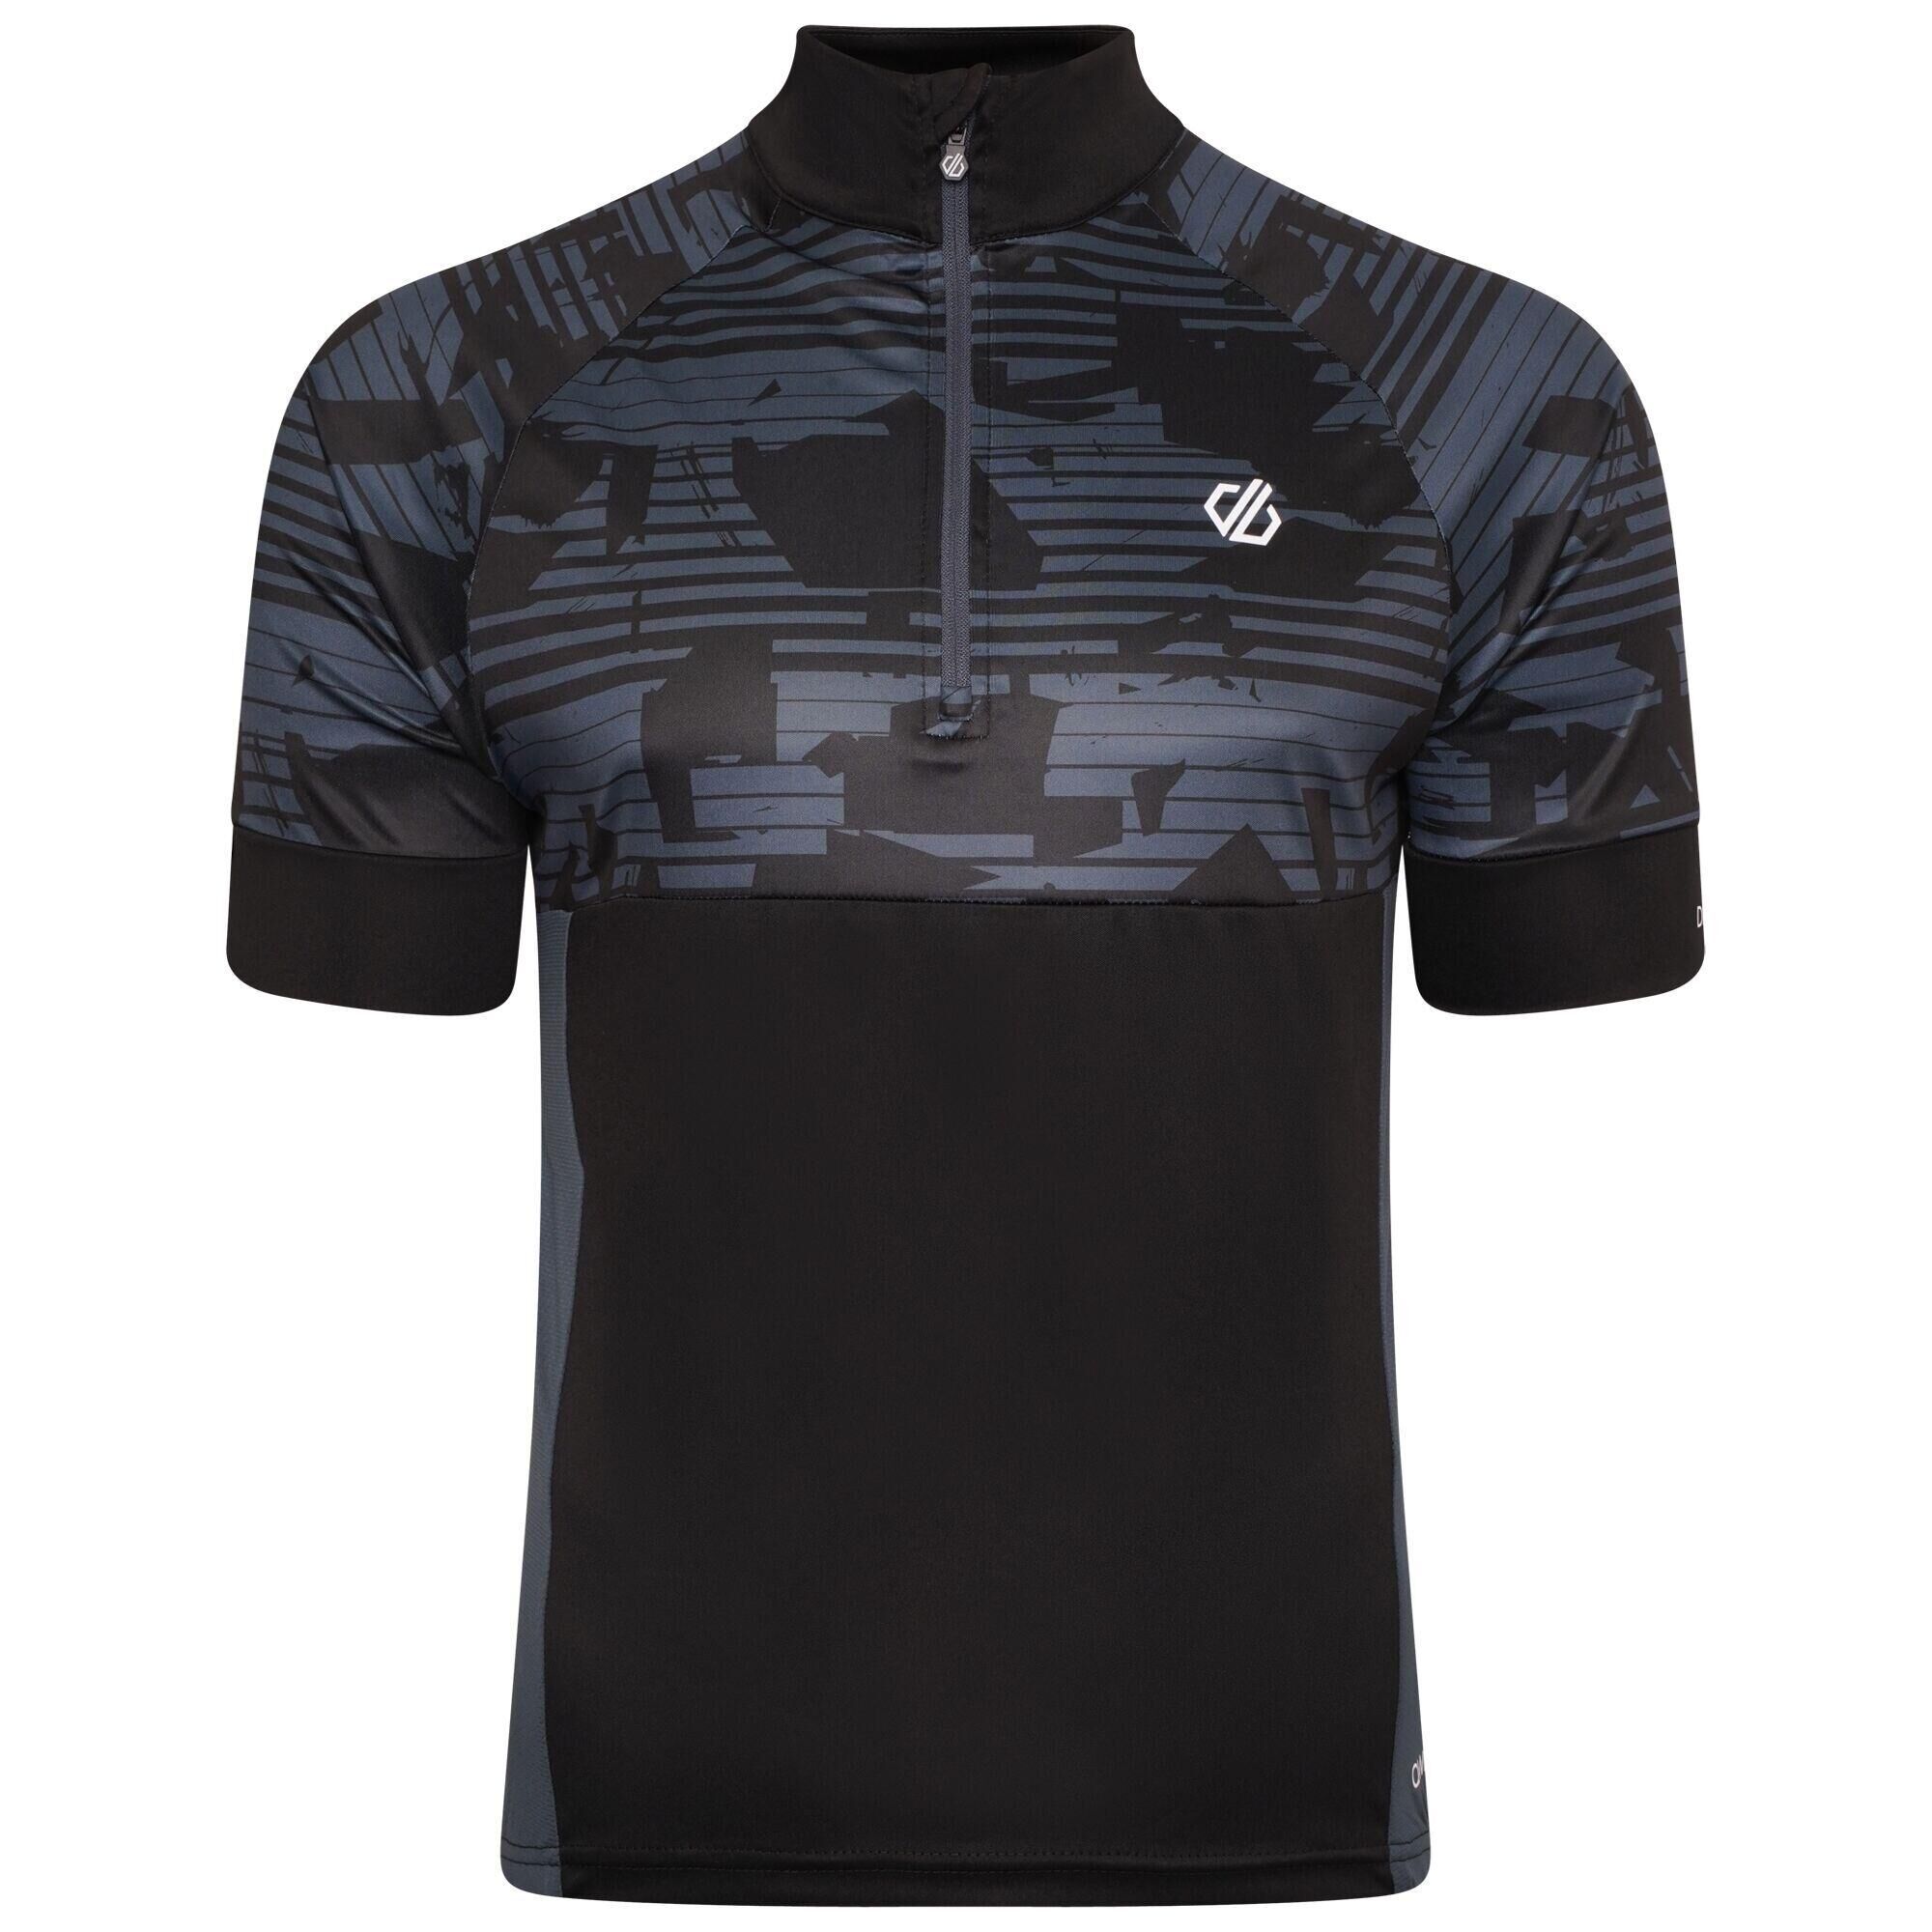 DARE 2B Mens Stay The Course II Downshift Print Cycling Jersey (Black)